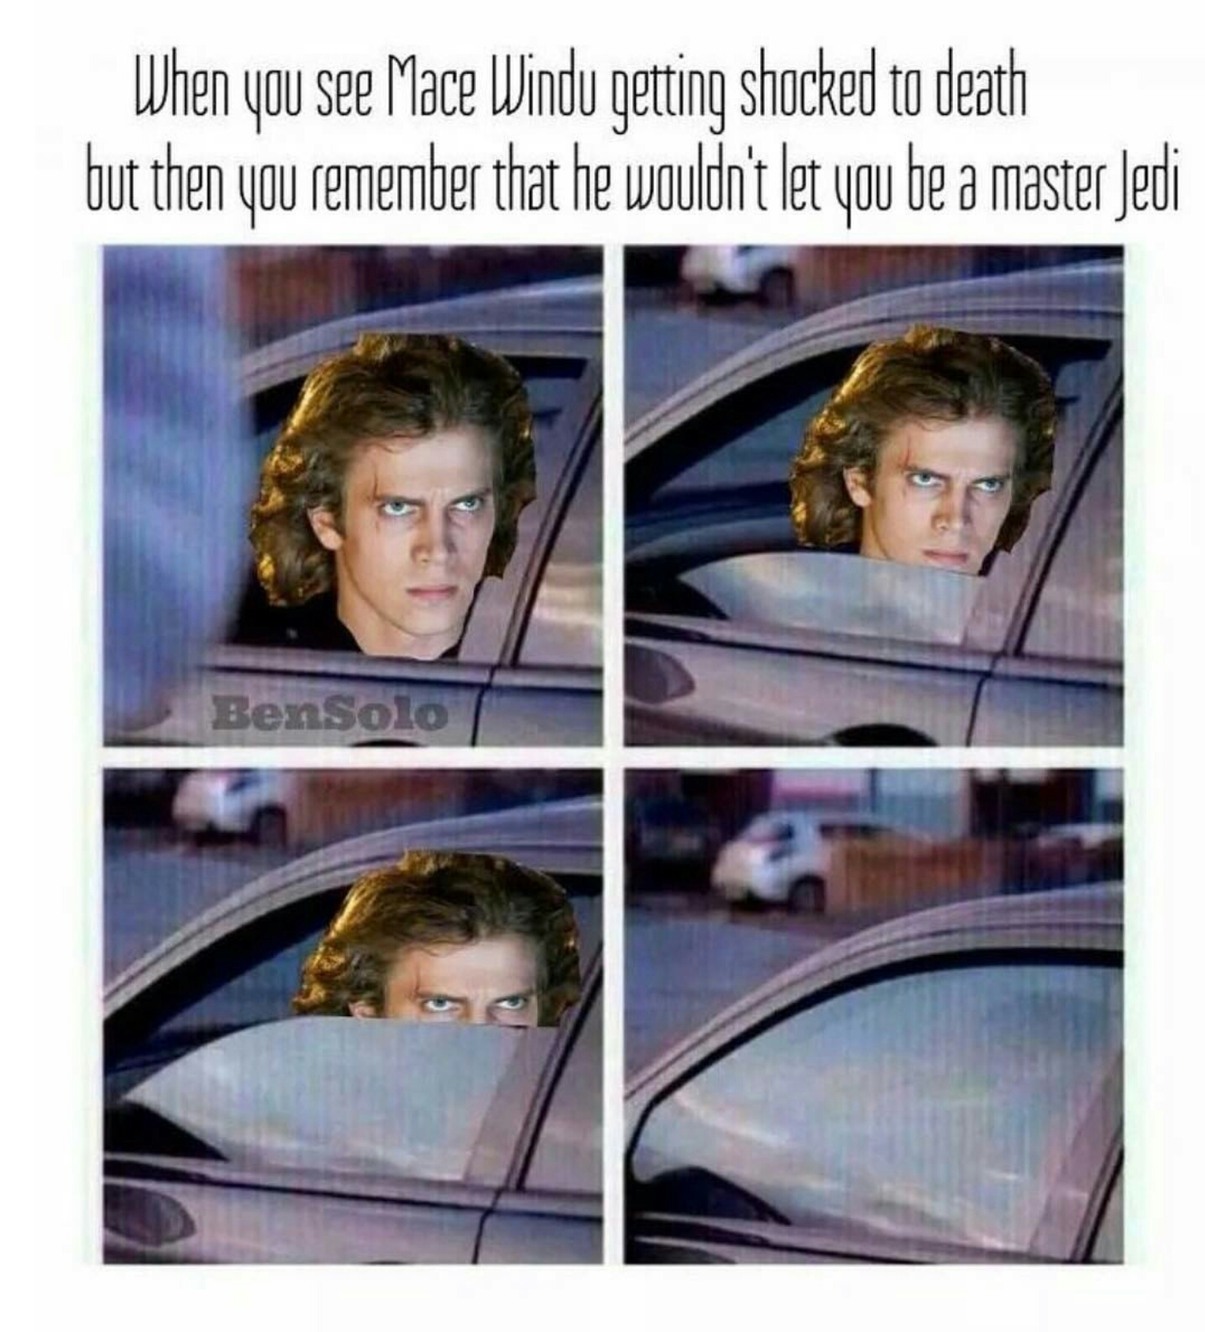 Another Star Wars meme